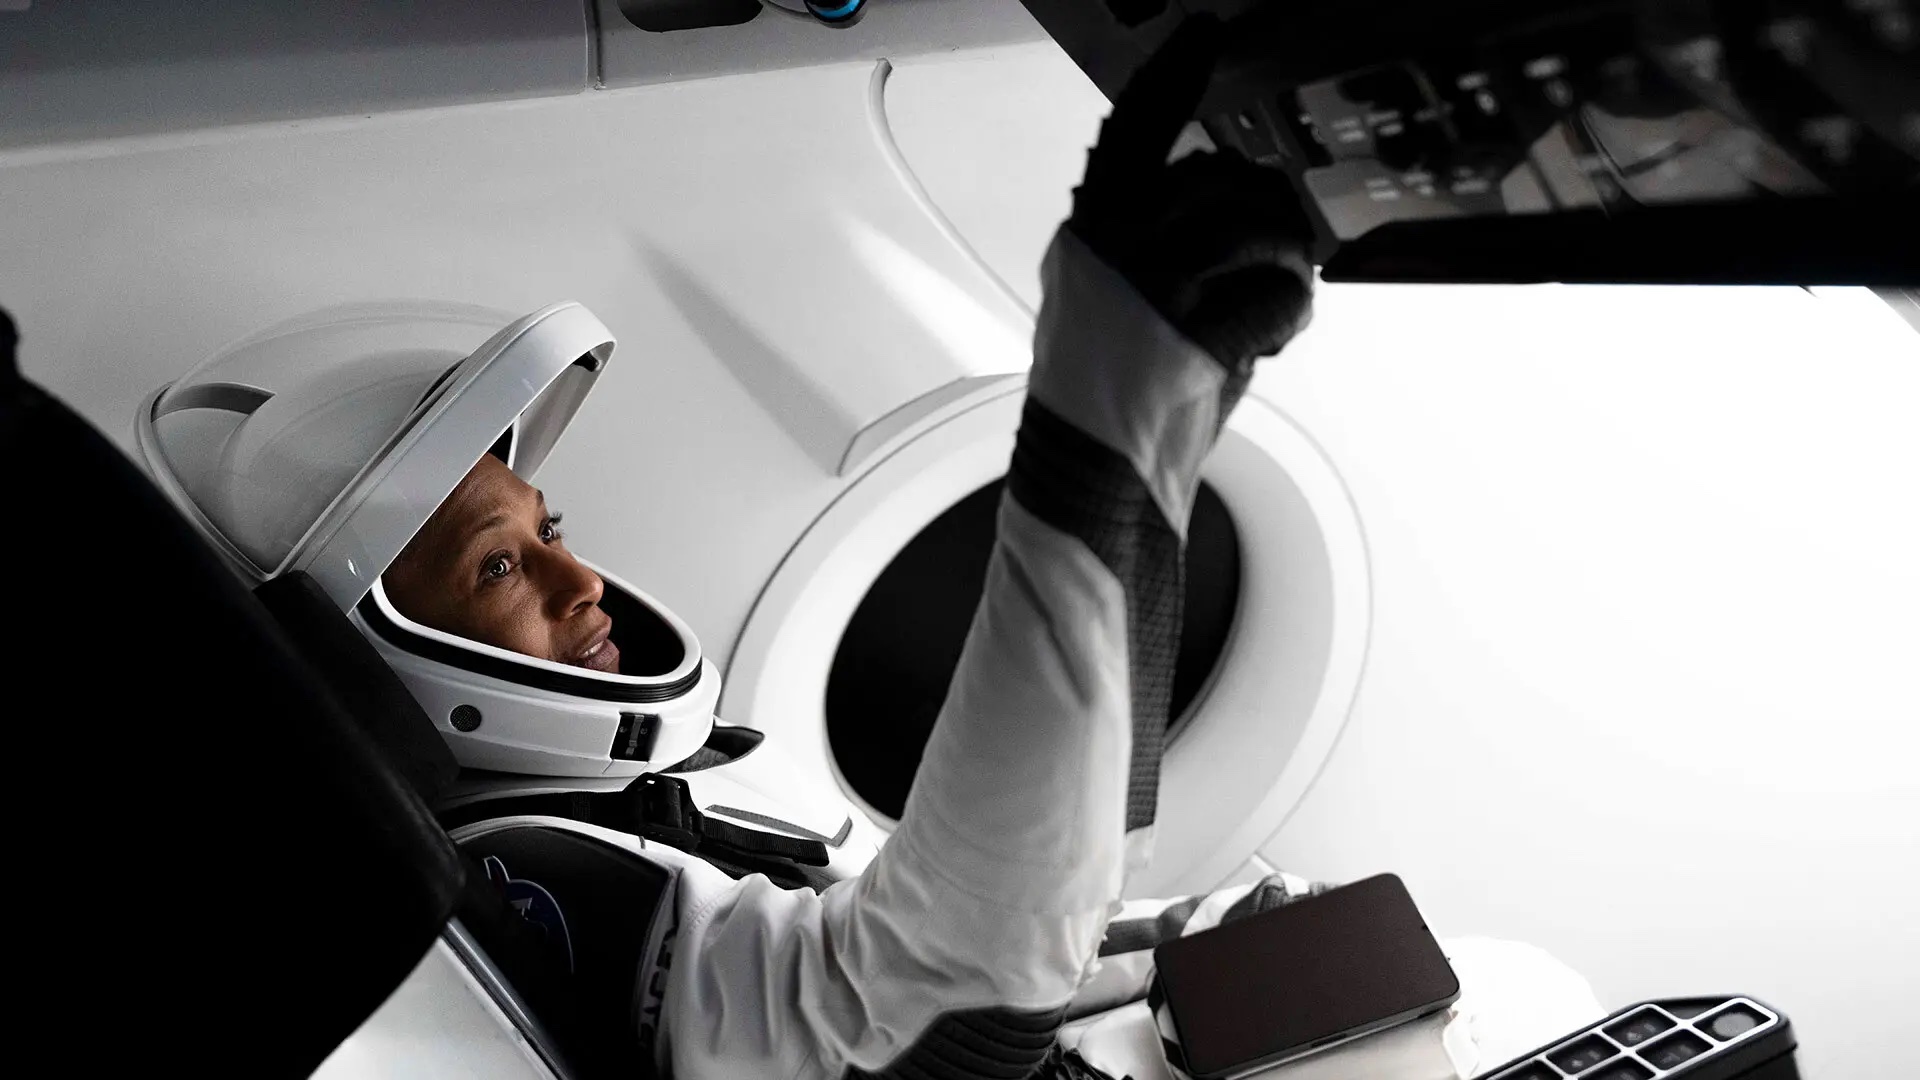 Jeanette Epps. M.S. '94, Ph.D '00 (below, pictured in crew capsule) is part of a NASA-Space X crew of three American astronauts and one Russian cosmonaut that lifted off late Sunday night from Kennedy Space Center for a six-month mission on the International Space Station.Photo by CHANDAN KHANNA/AFP via Getty Images